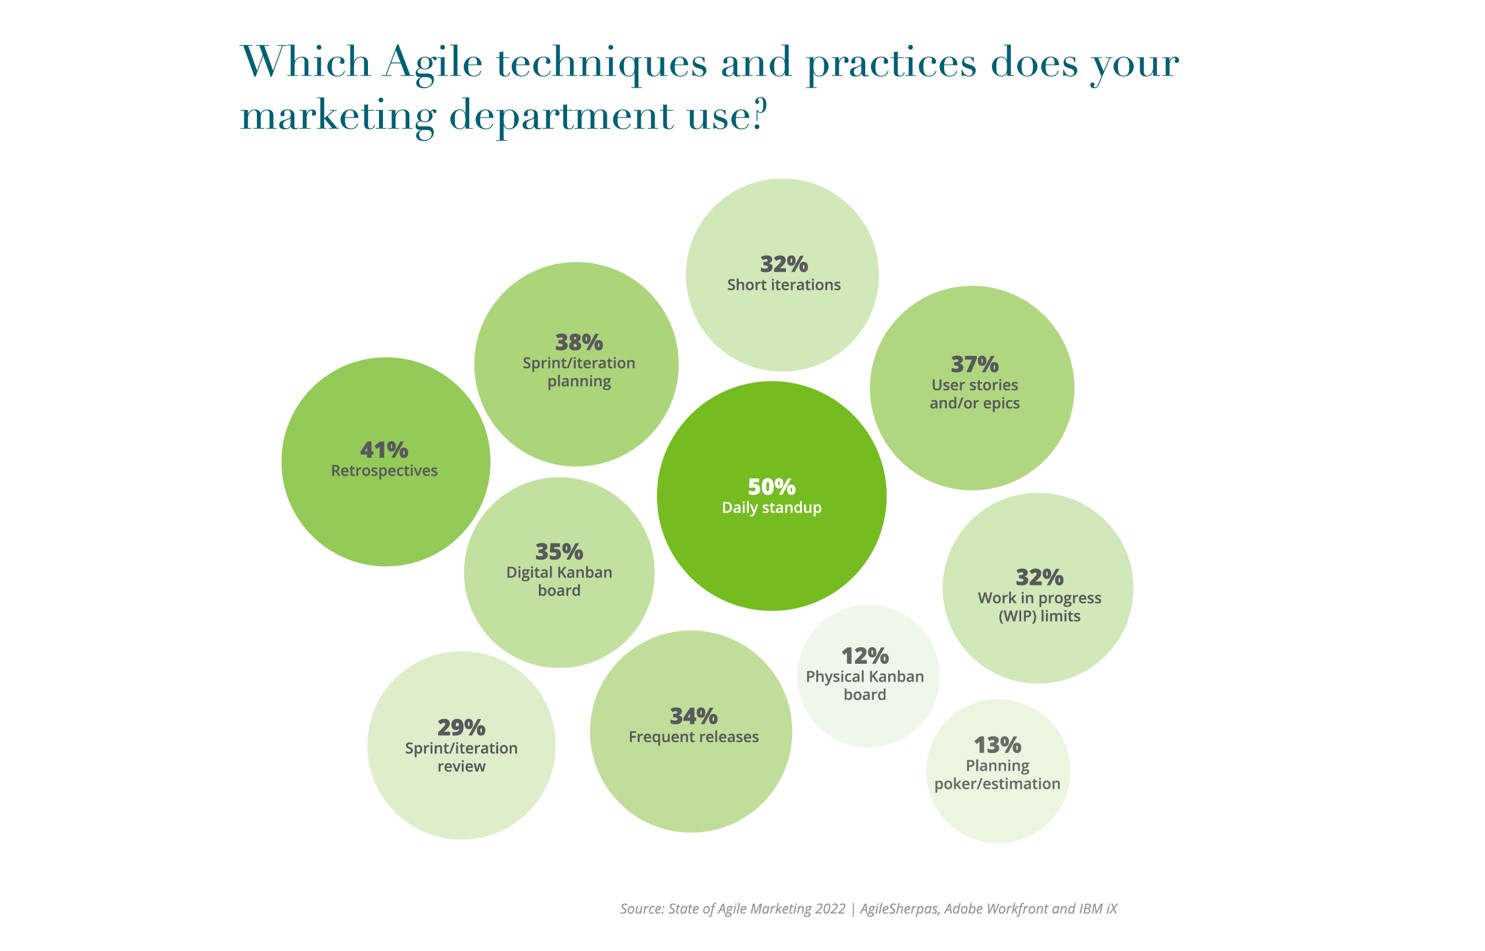 Annual State of Agile Marketing Report 2022 Which agile techniques and practice does your marketing department use?